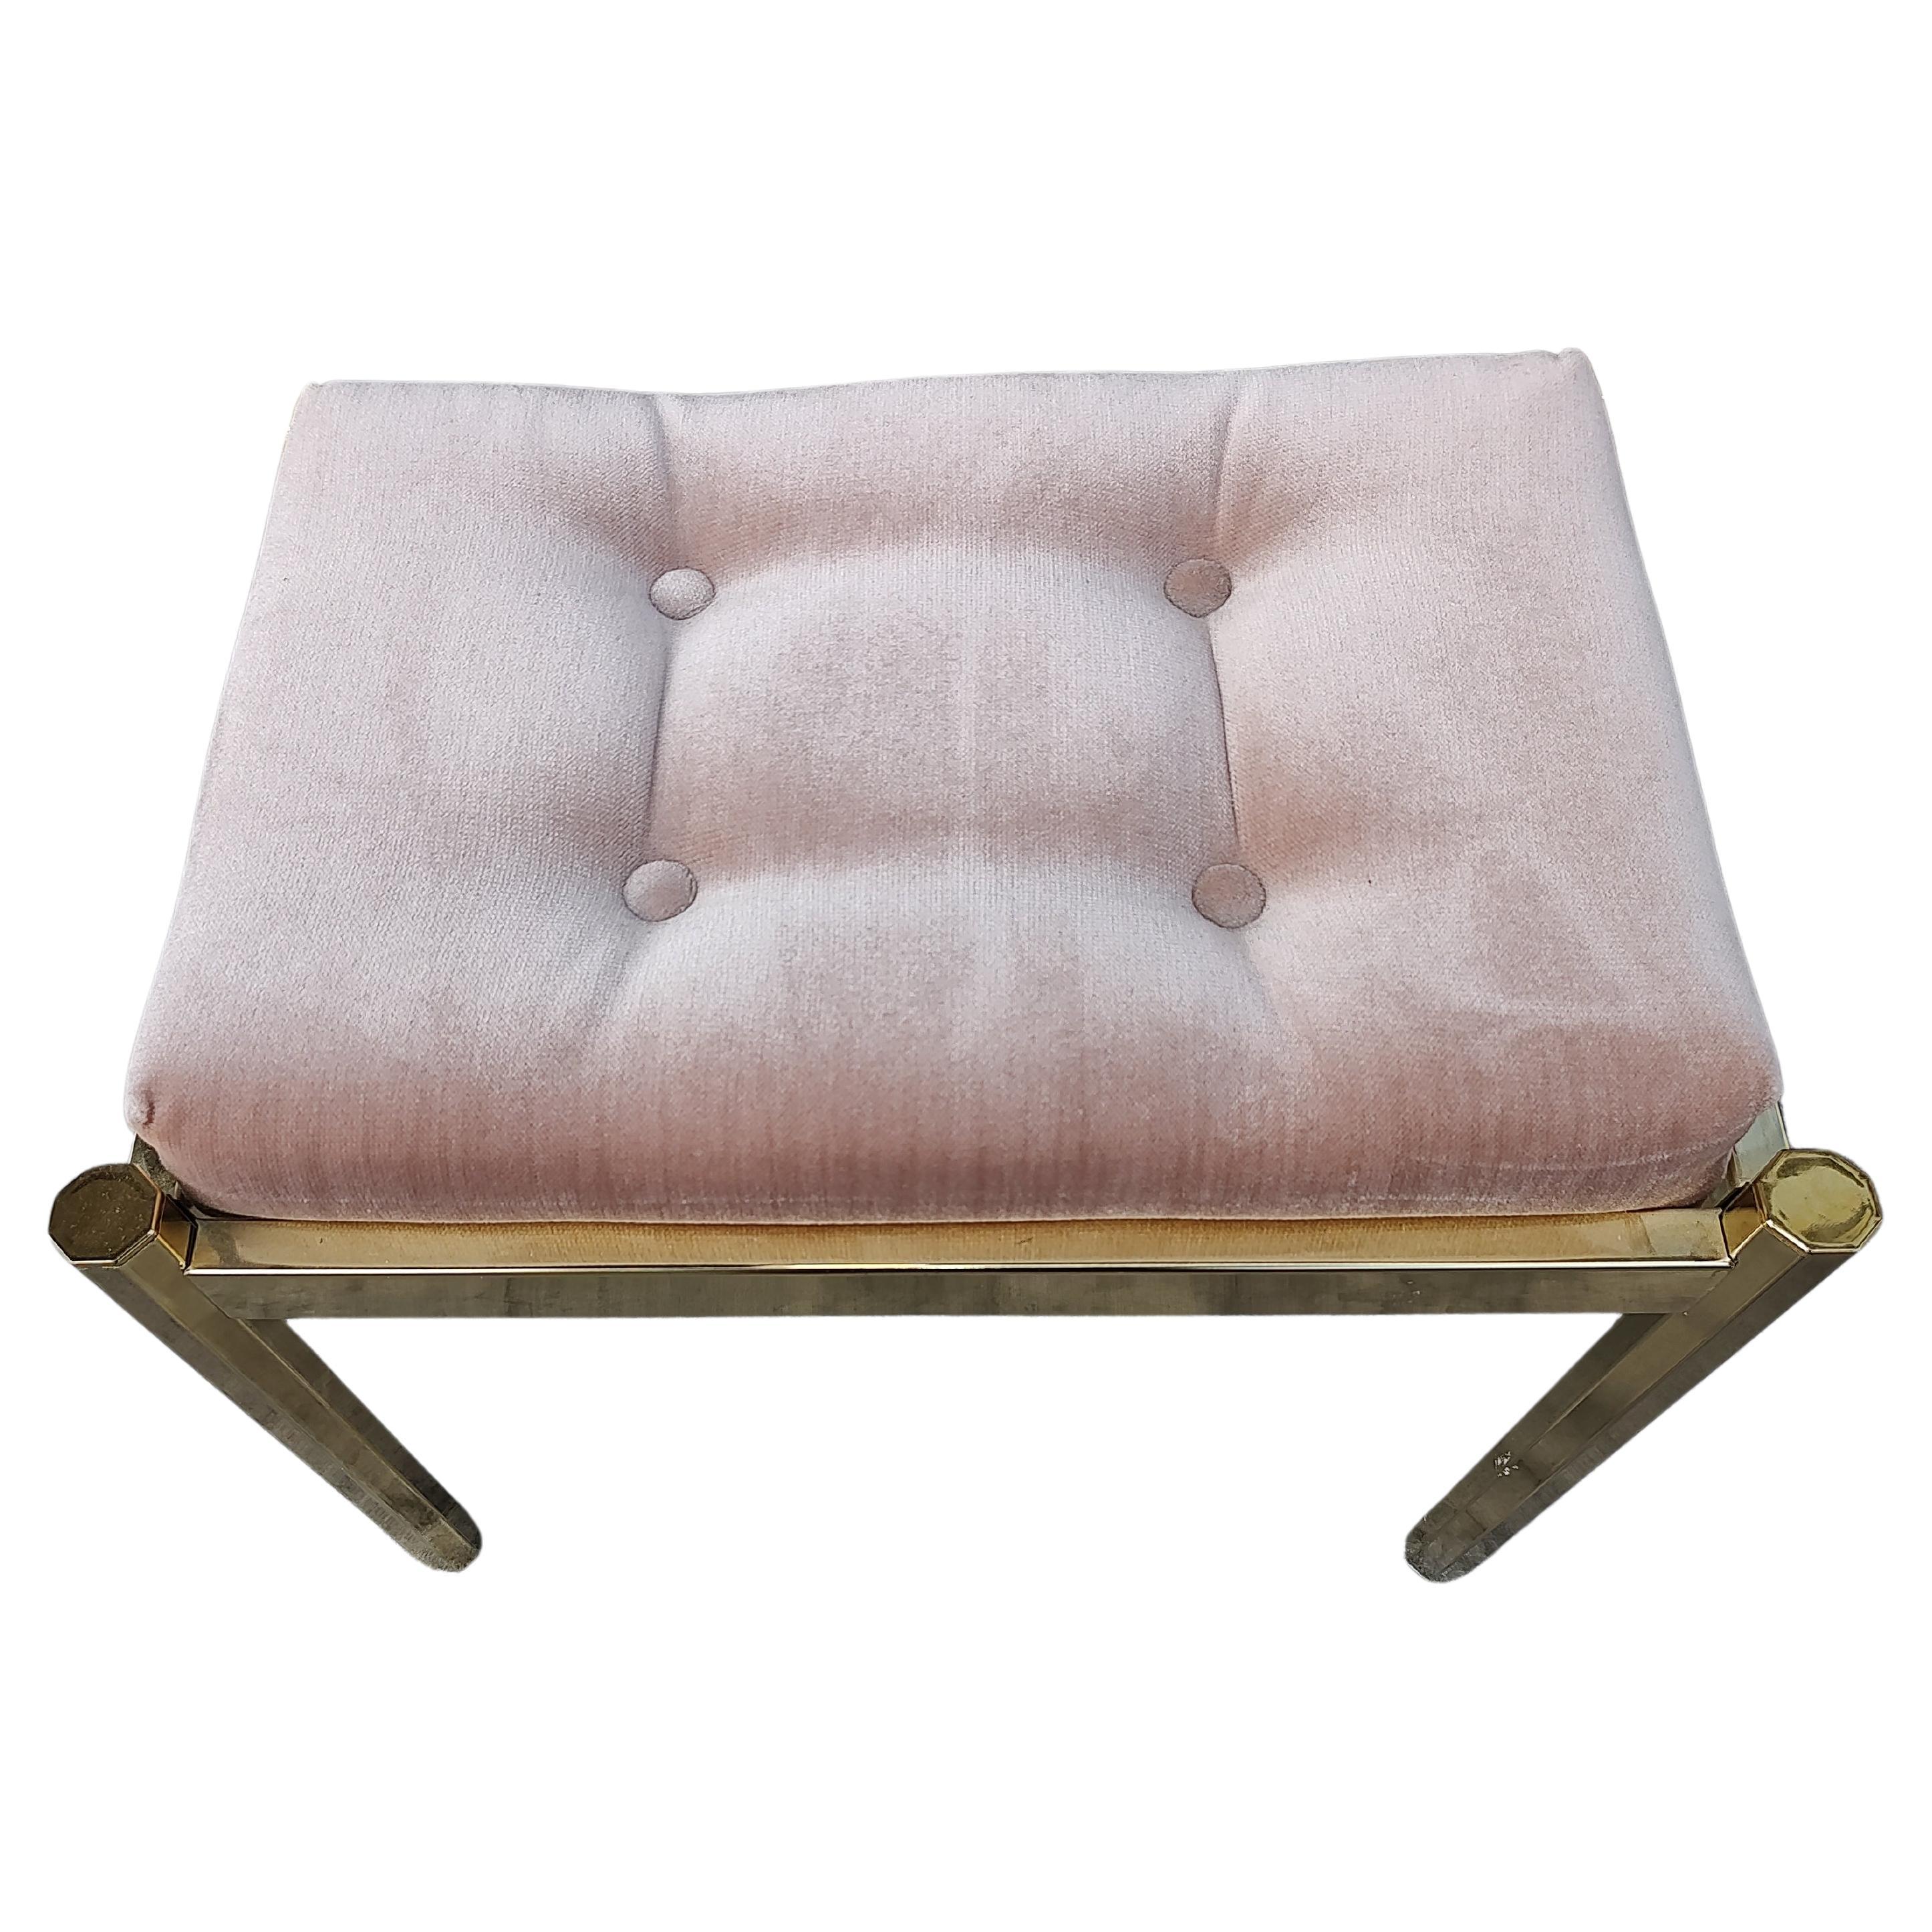 American Pair of Mid-Century Modern Hollywood Regency Brass with Tufted Cushions Benches